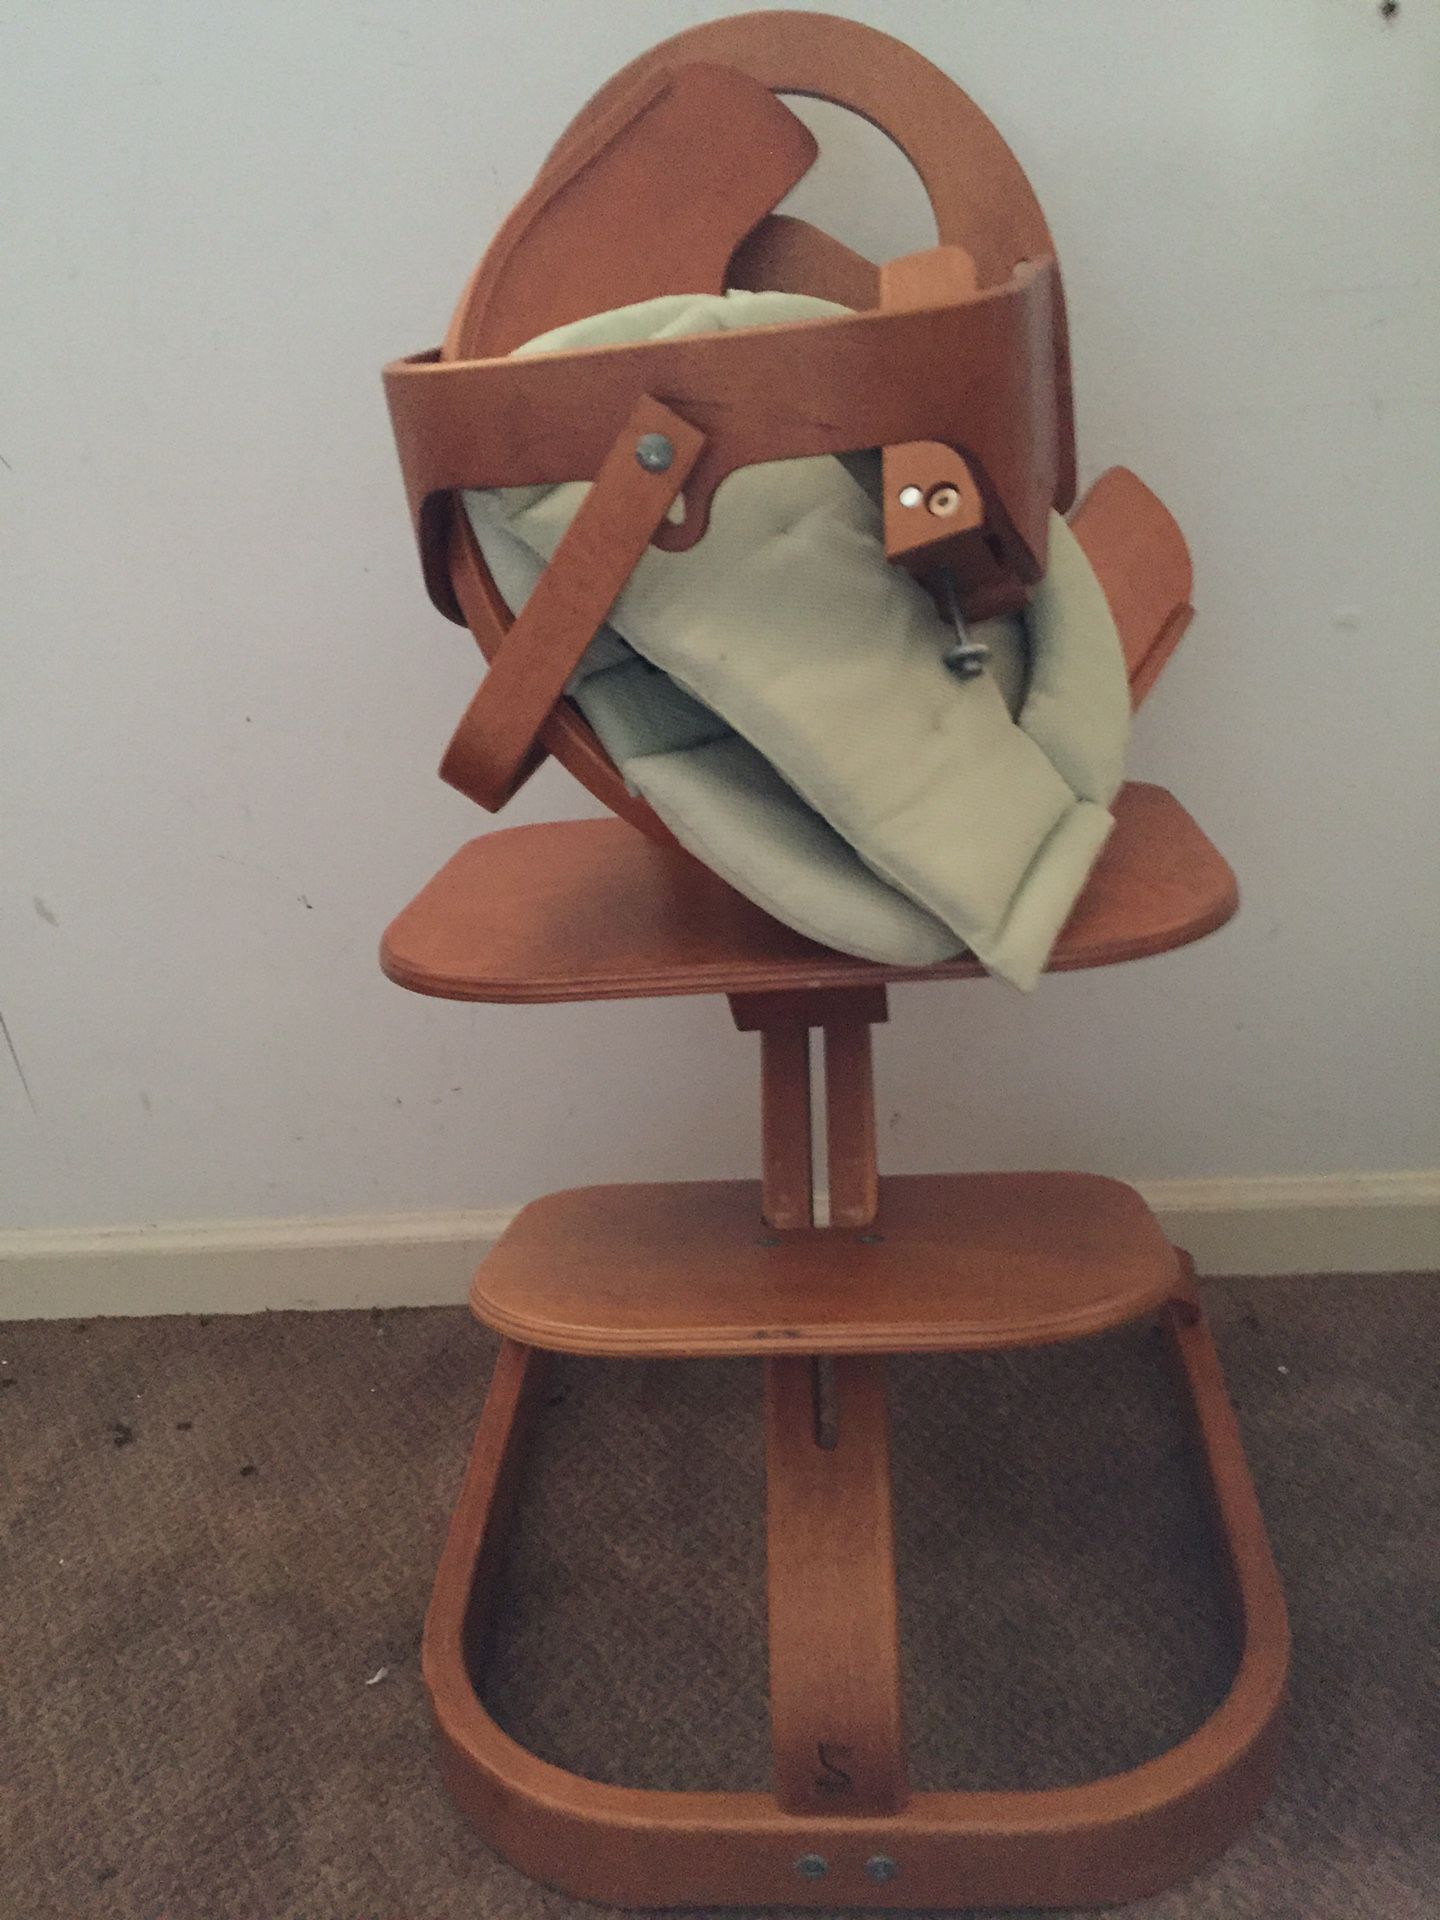 Svan high chair turns into toddler chair and desk chair.